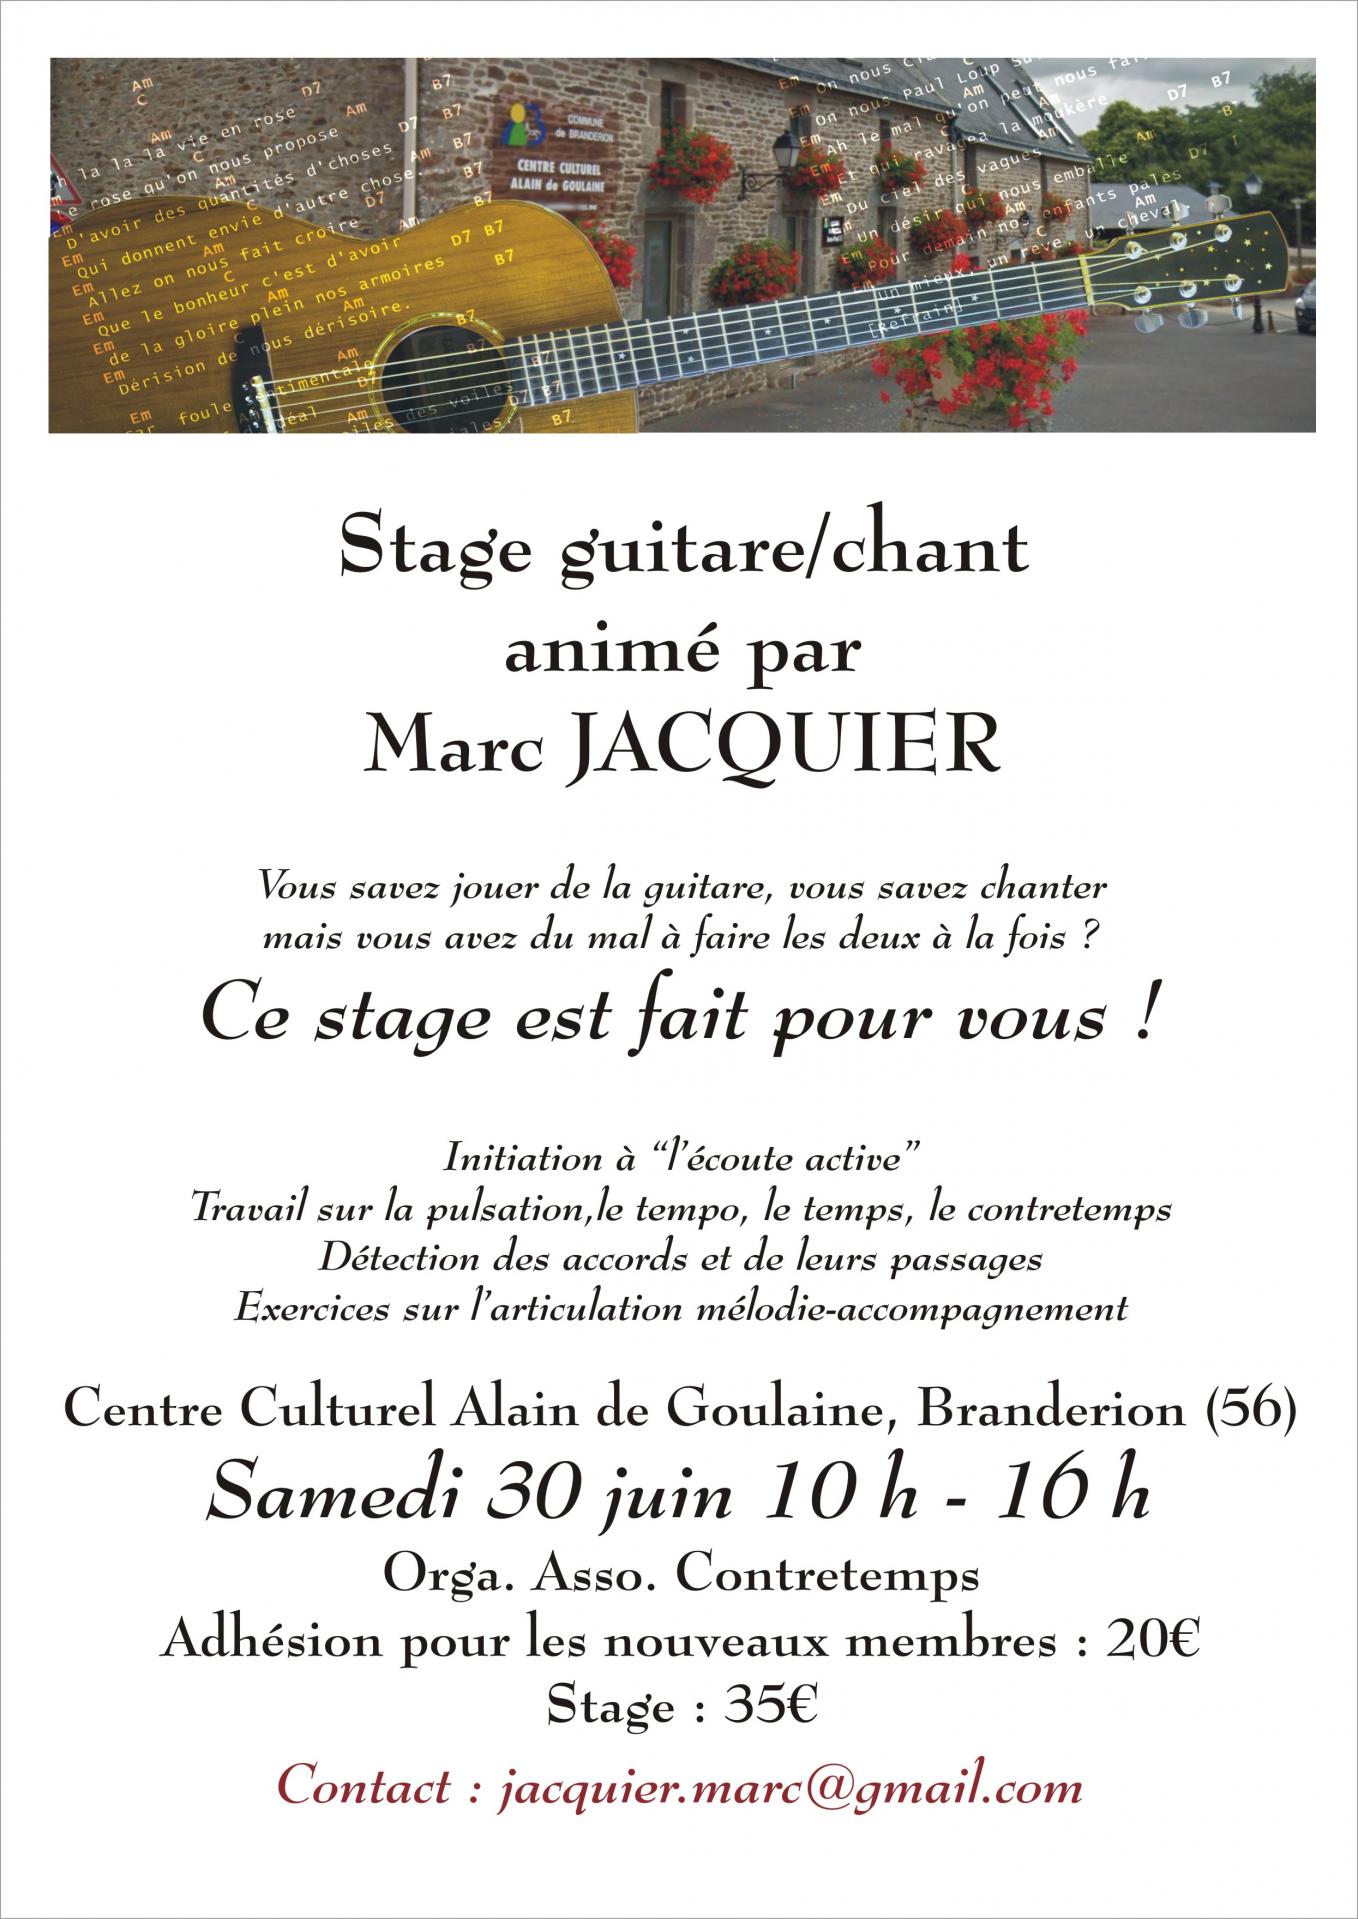 Stage guitare chant